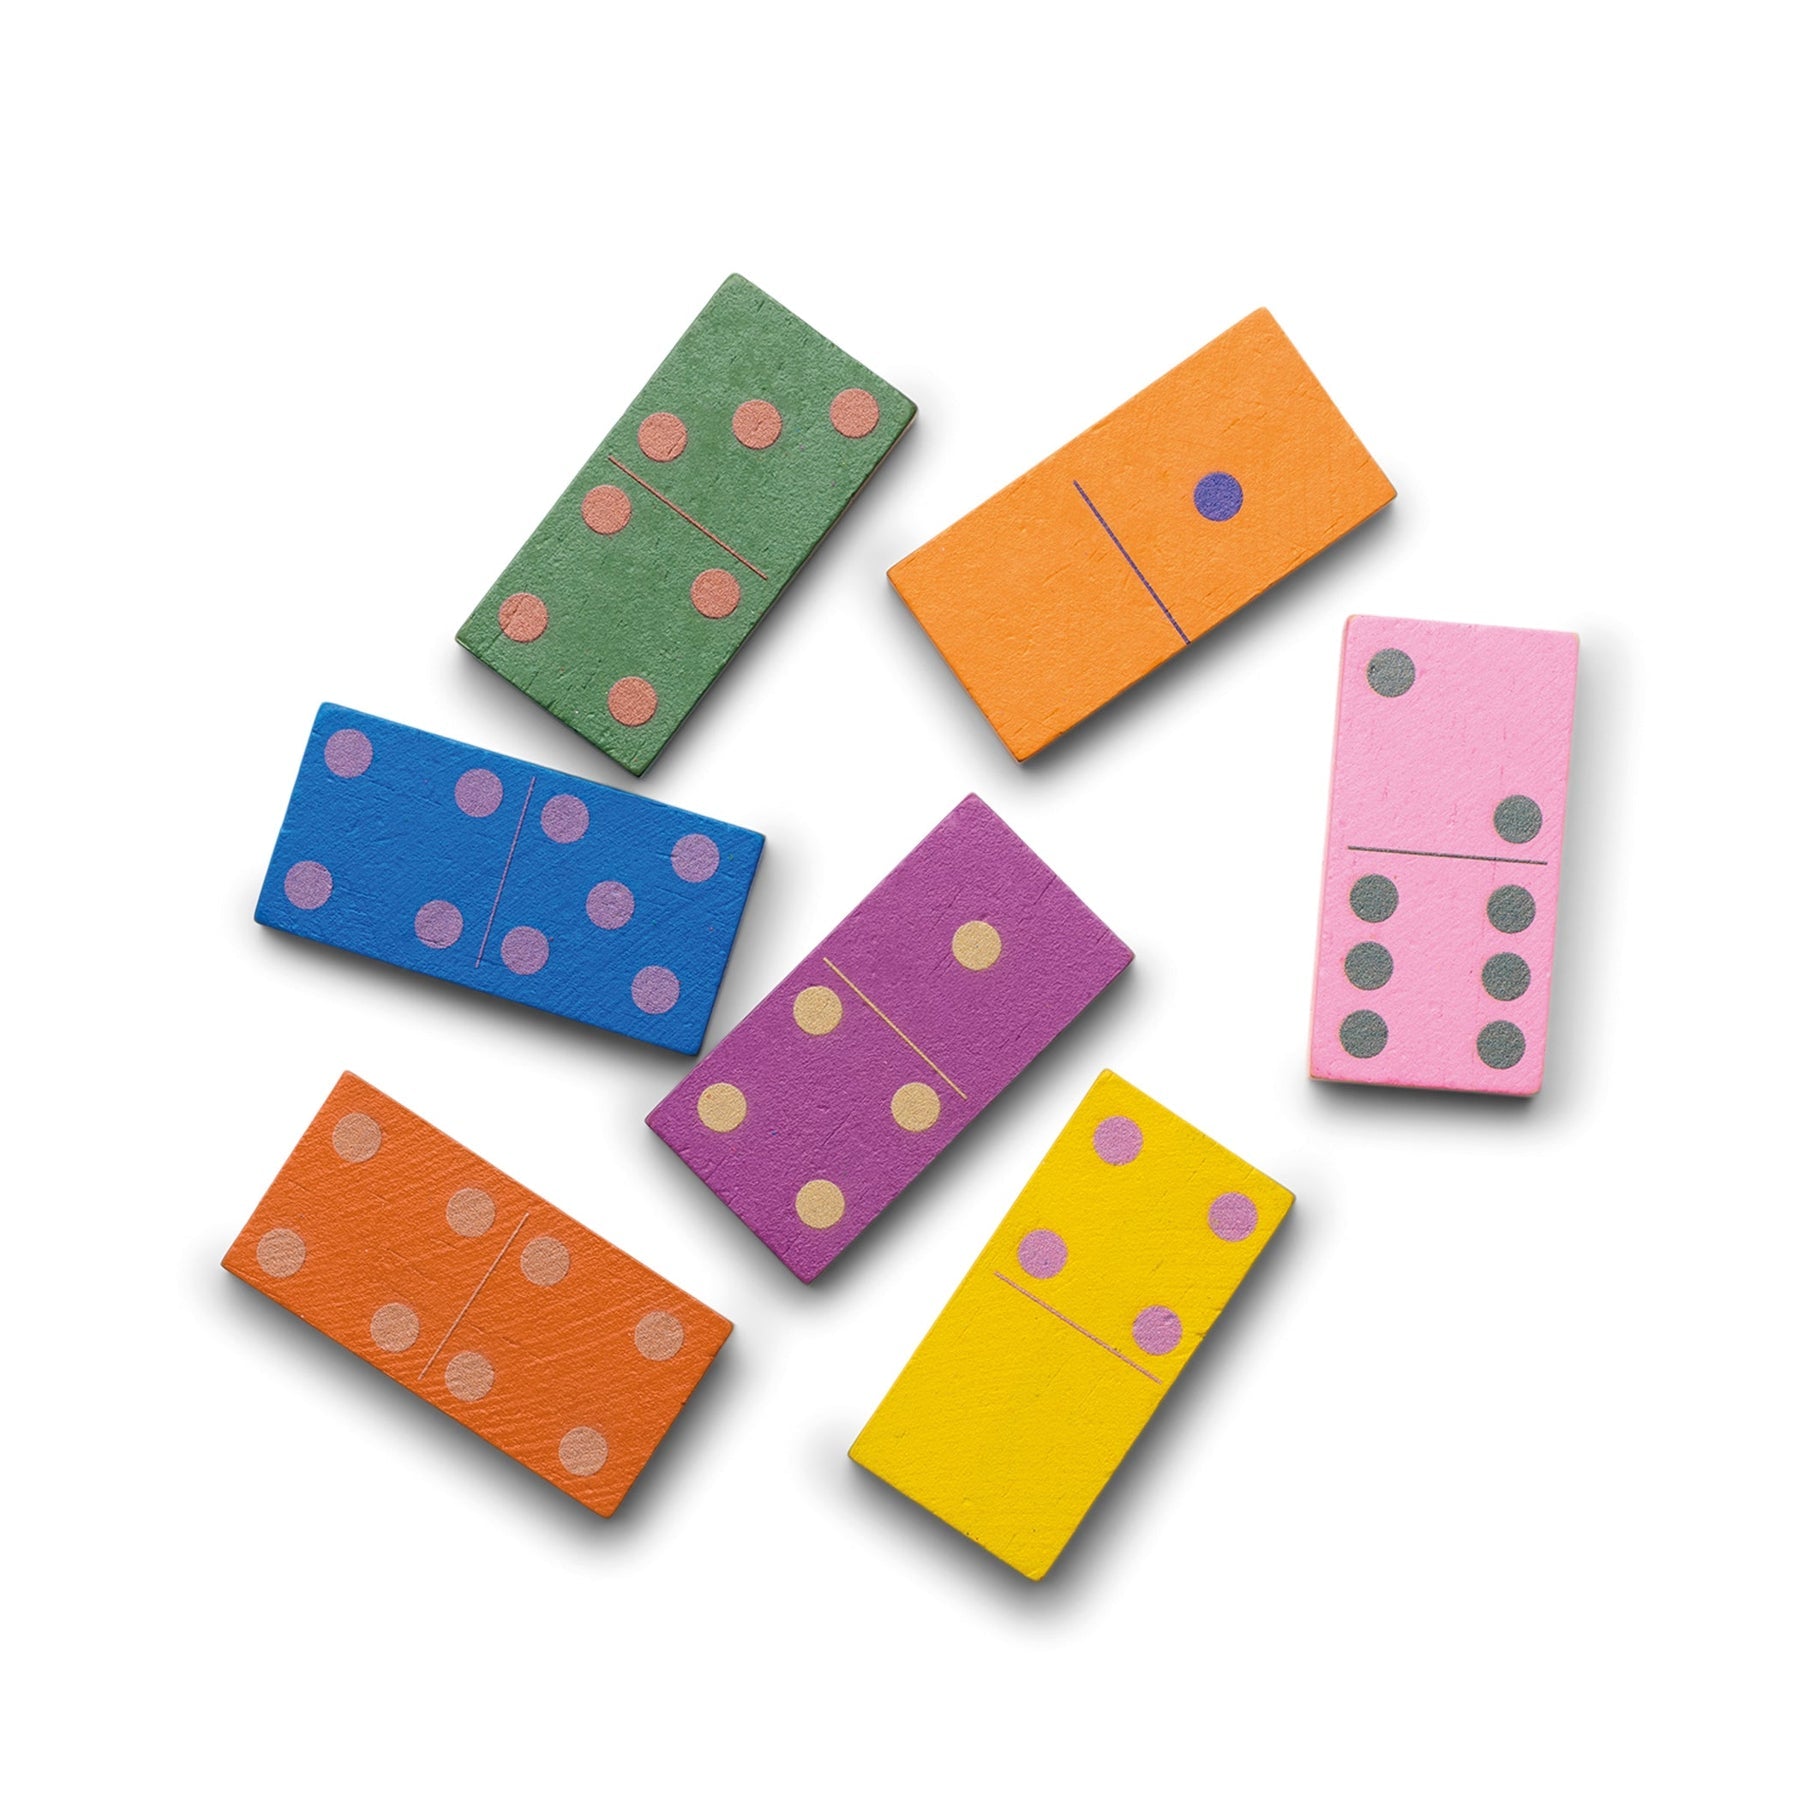 Library Of Games - Dominoes